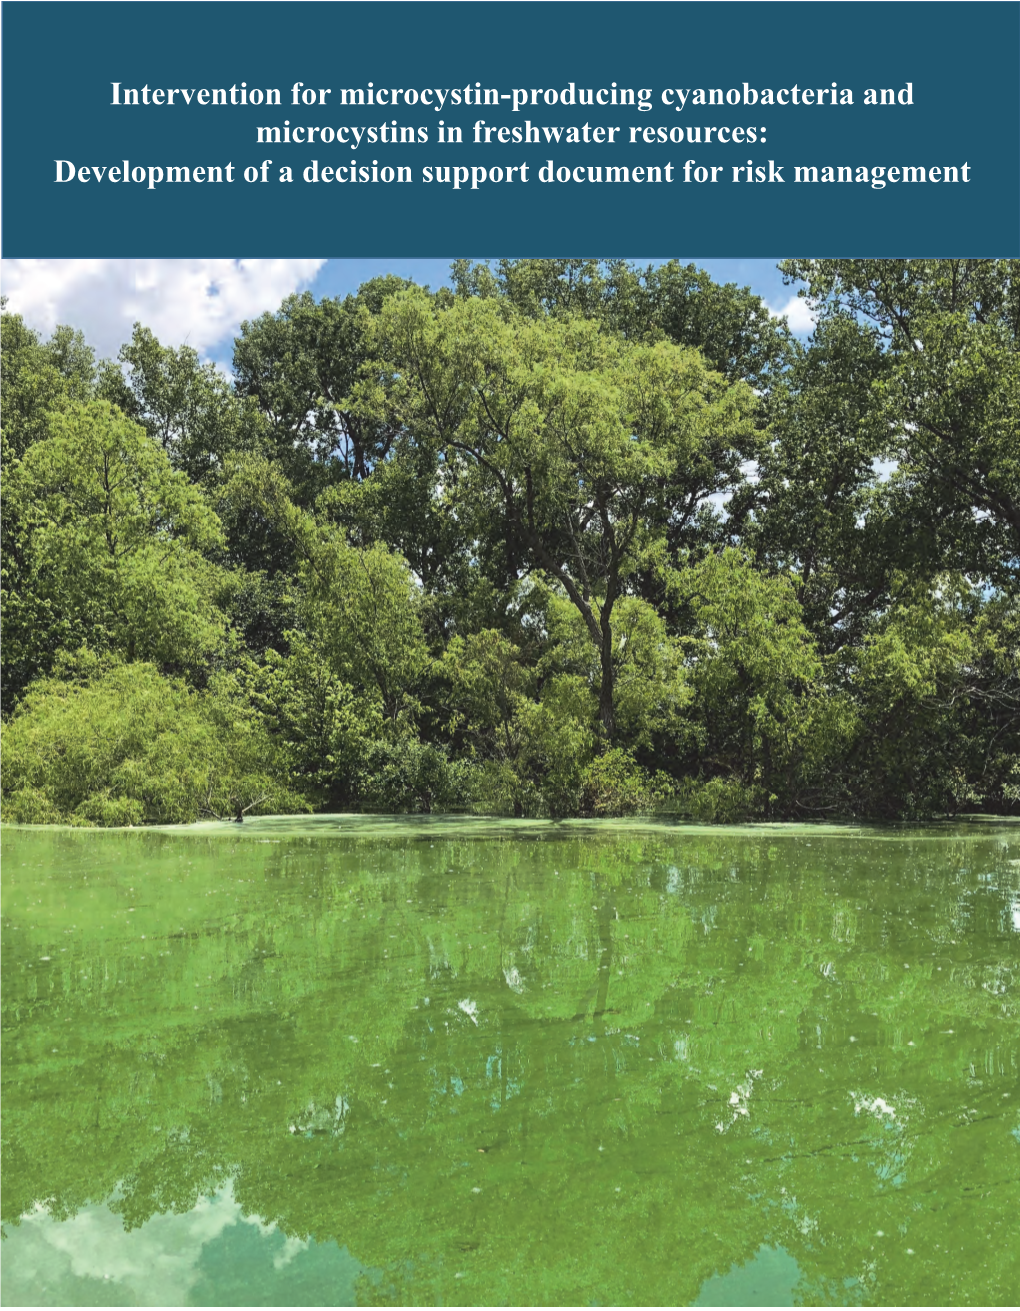 Intervention for Microcystin-Producing Cyanobacteria and Microcystins in Freshwater Resources: Development of a Decision Support Document for Risk Management